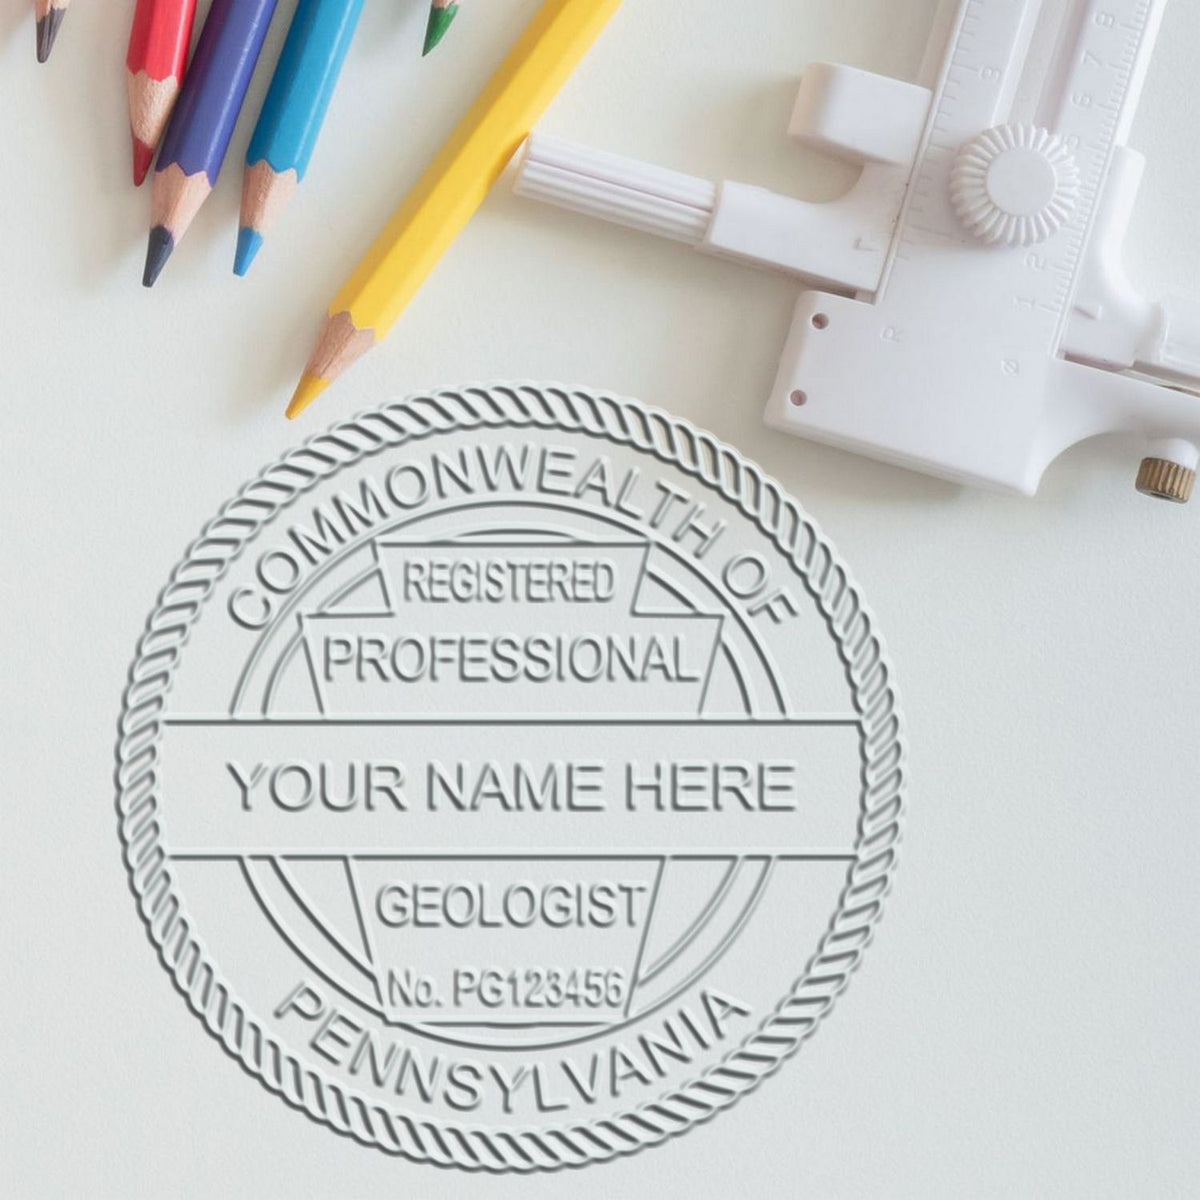 An in use photo of the Soft Pennsylvania Professional Geologist Seal showing a sample imprint on a cardstock